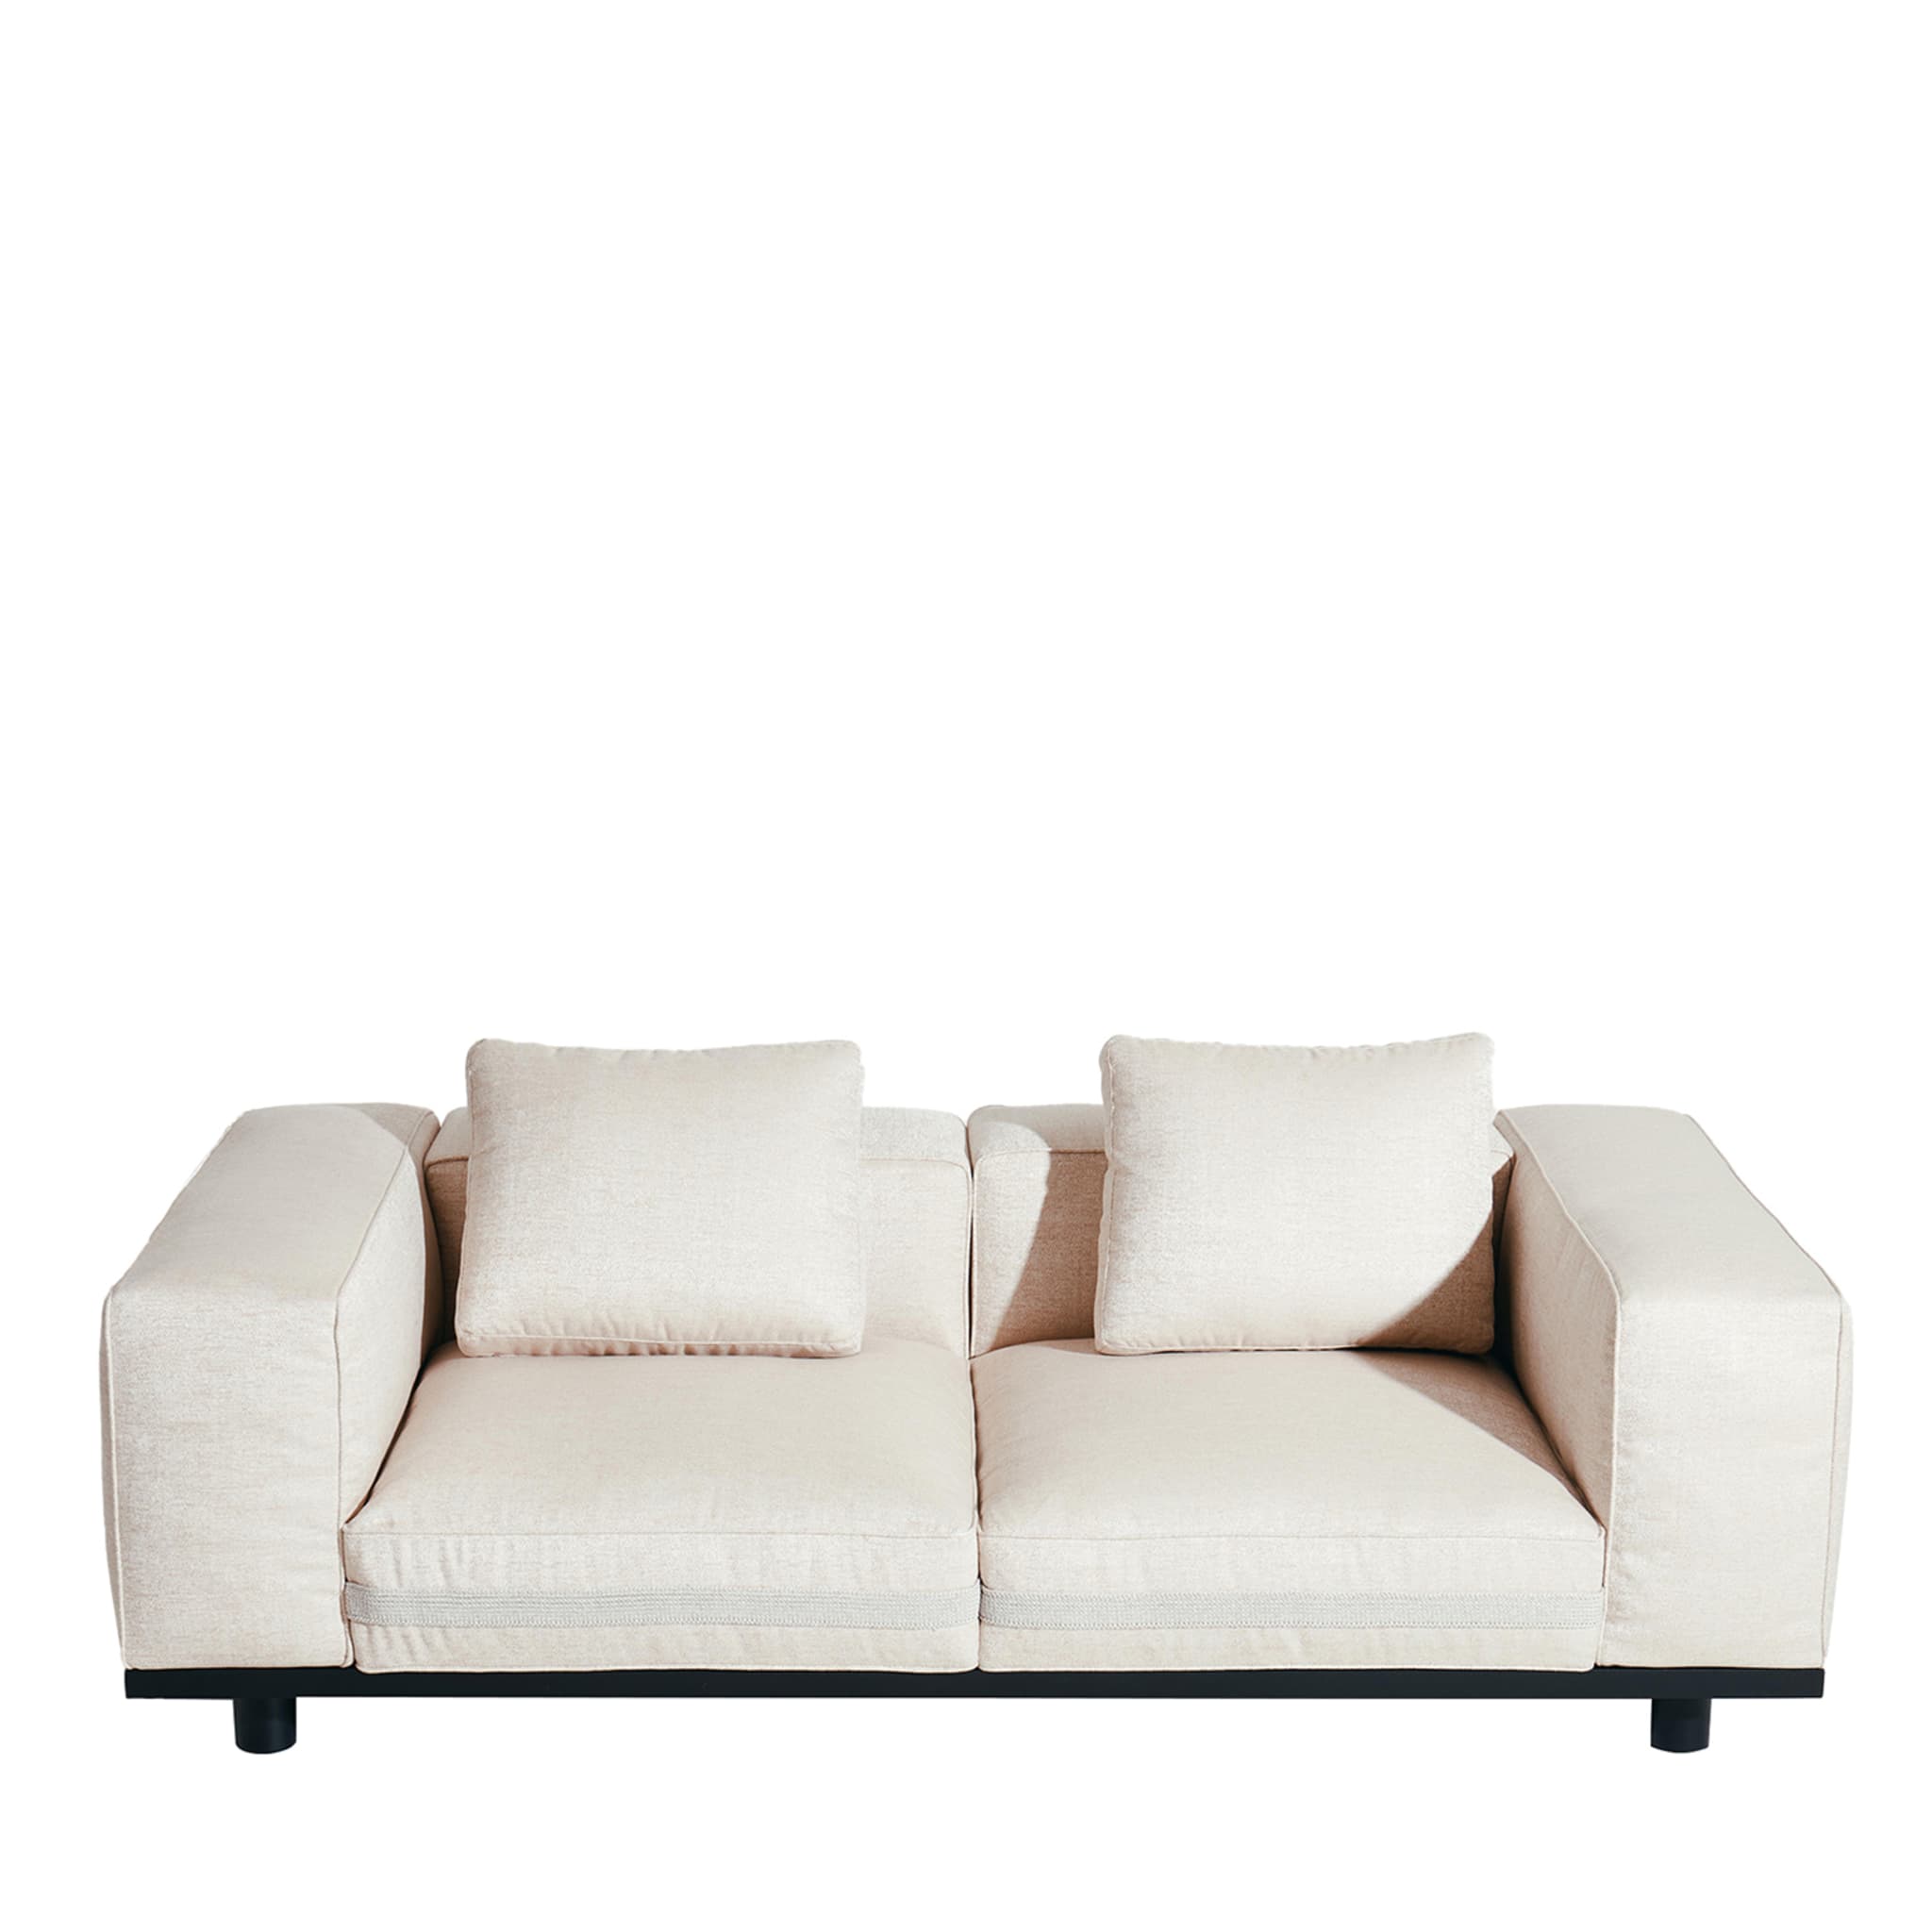 Saint Remy White 2-Seater Sofa #1 by Luca Nichetto - Main view